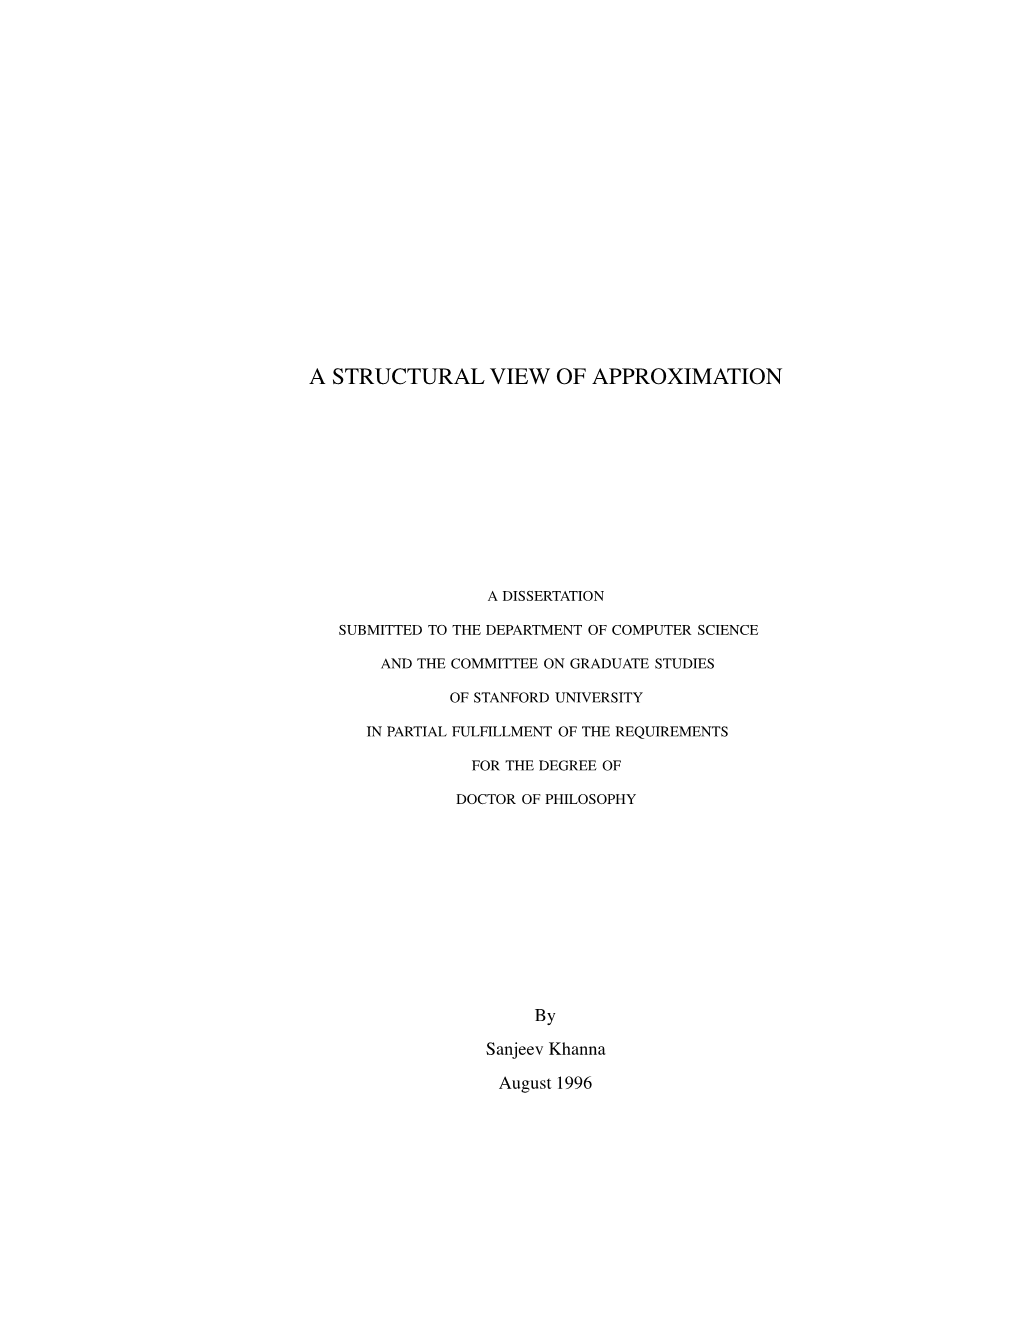 A Structural View of Approximation